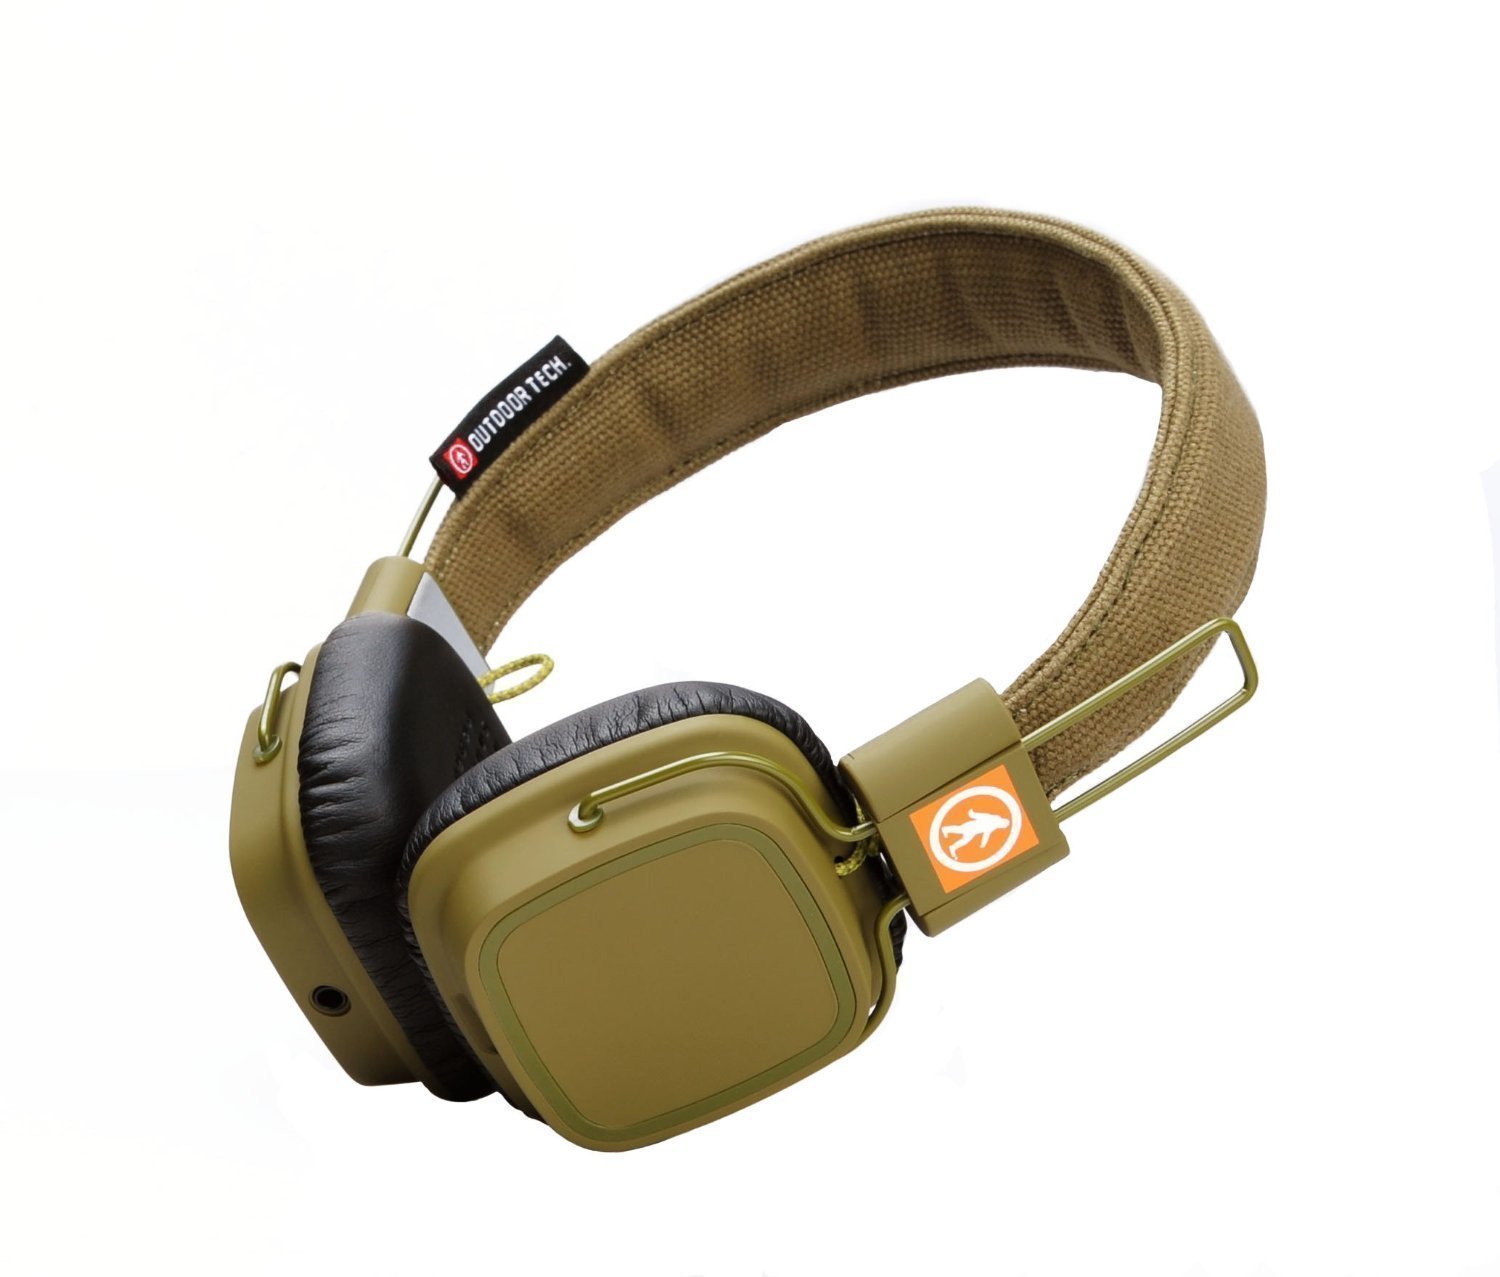 Casque sans fil supra-auriculaire Outdoor Tech Privates - Wireless Touch Control Headphones - Army Green